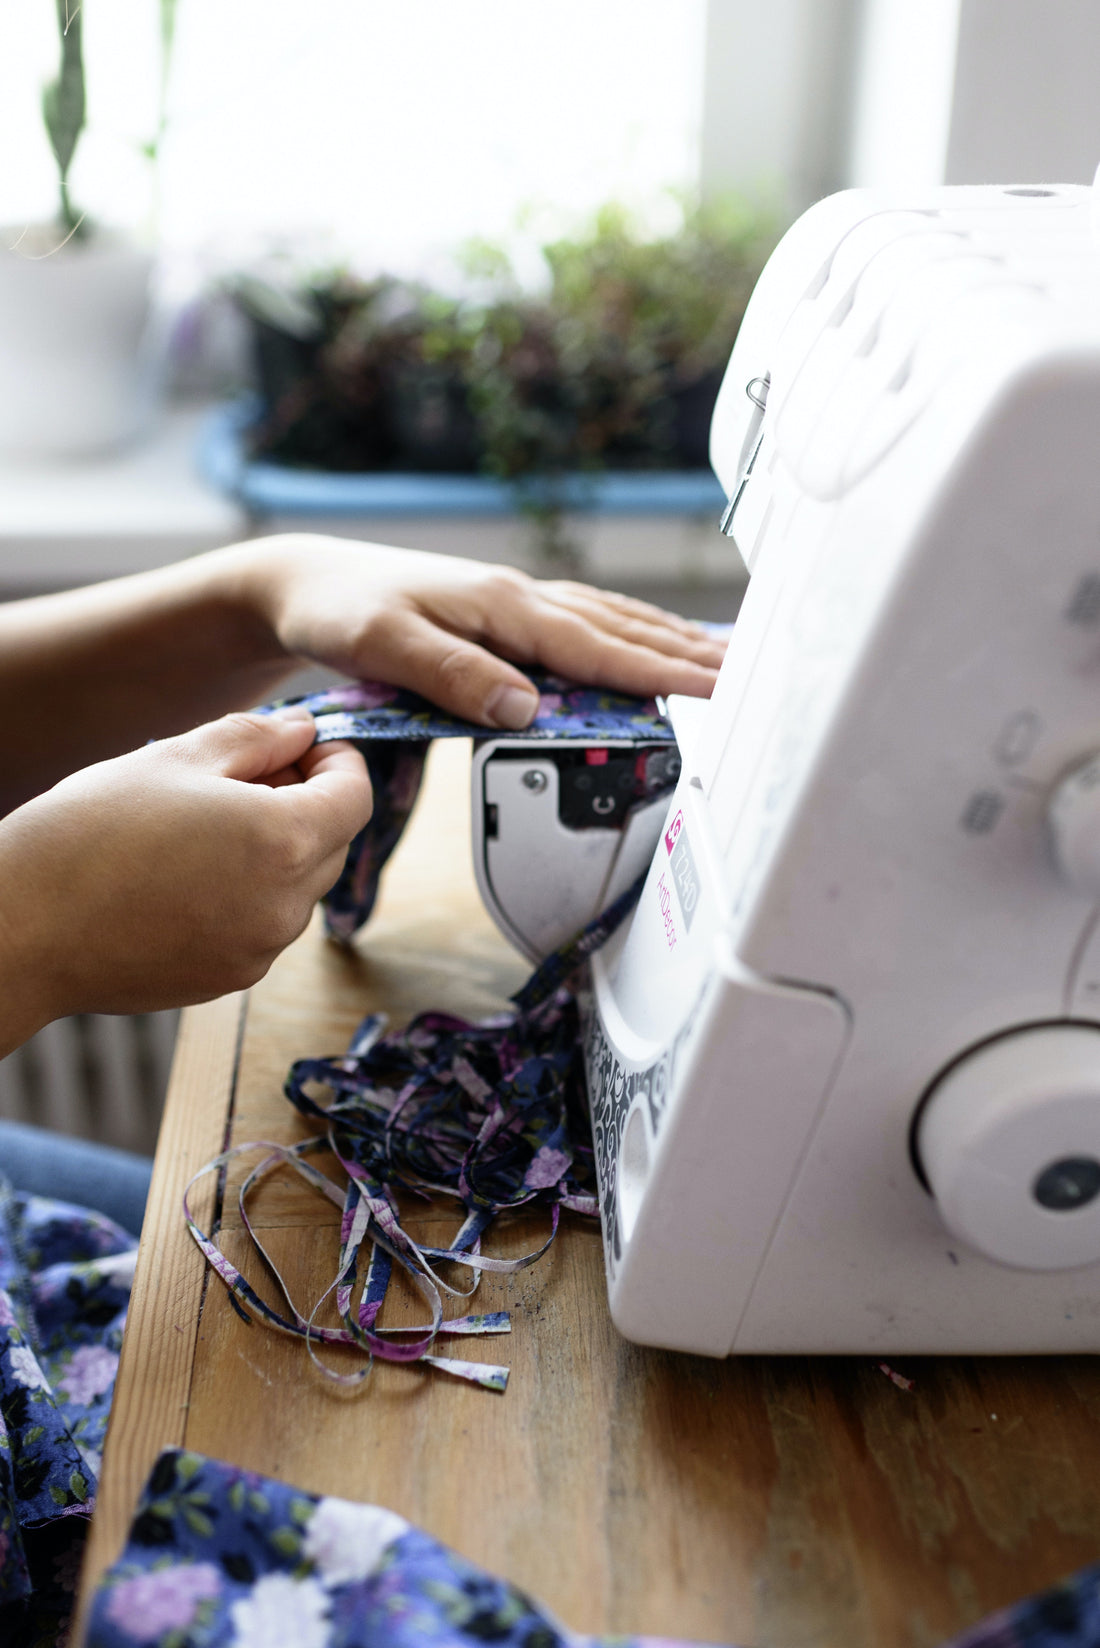 10 Sustainable Ways to Make Your Own Handmade Clothes with Organic Cotton